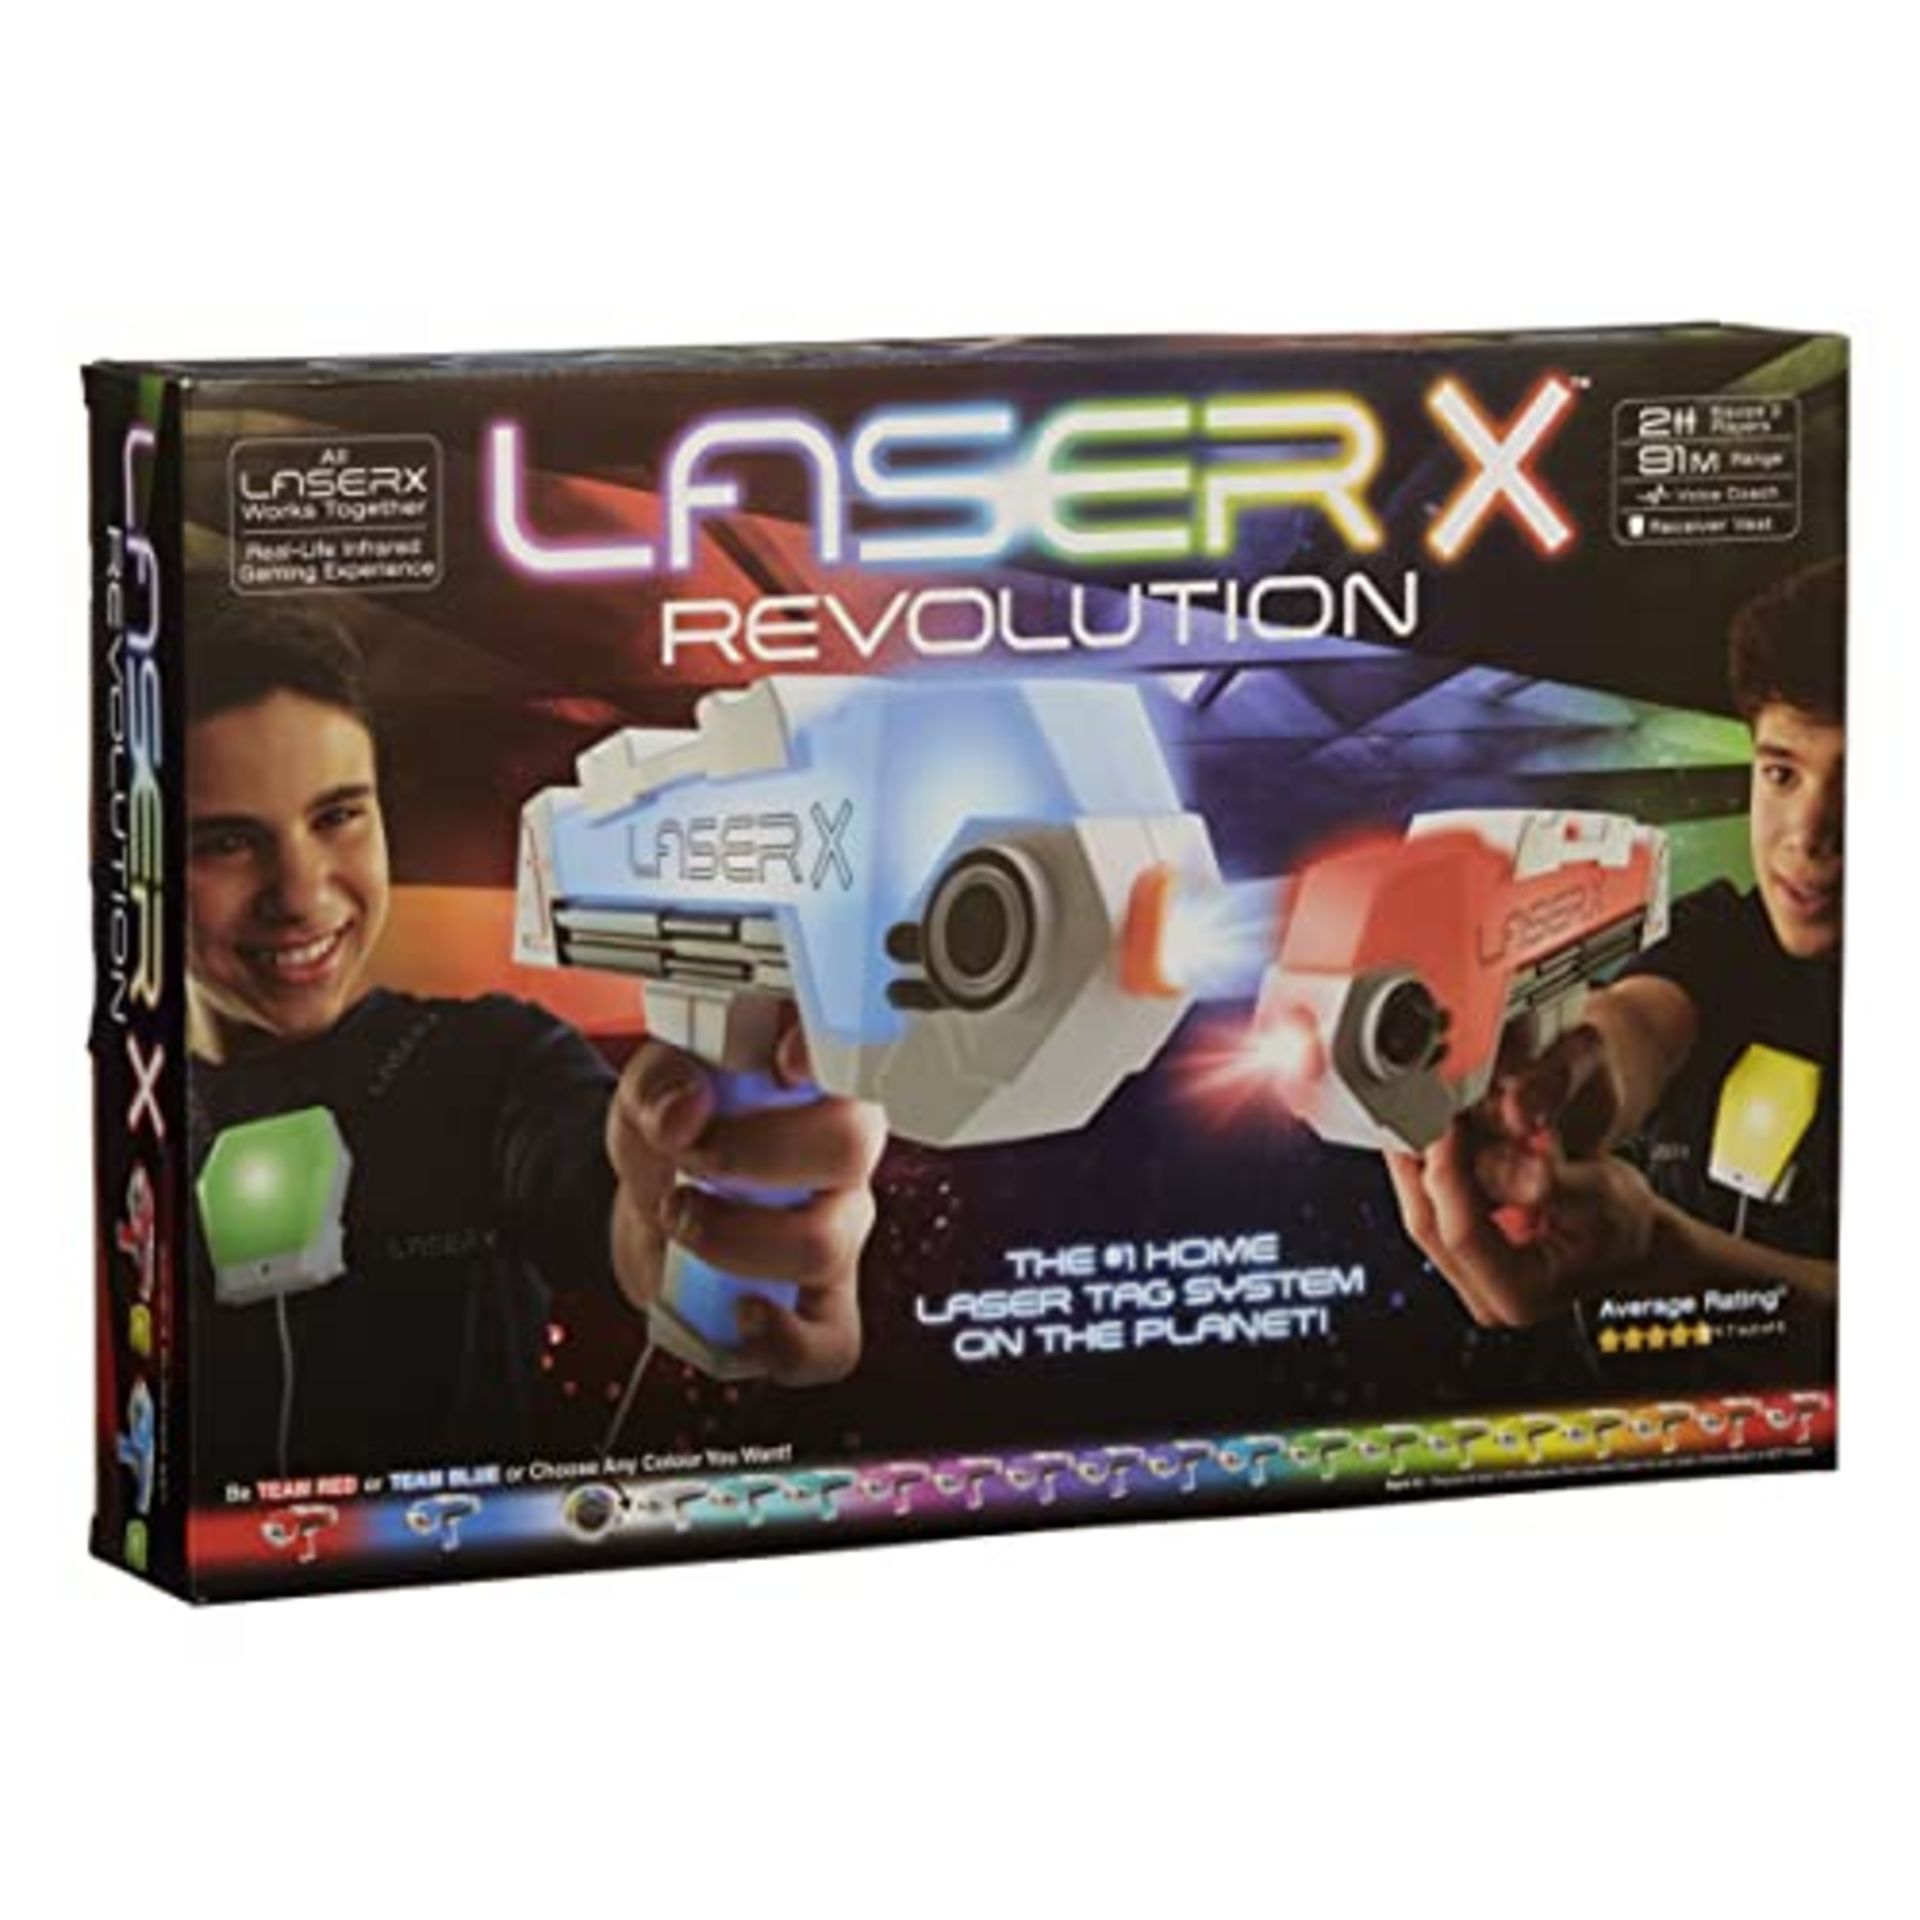 Laser X 88046 Revolution Double Blasters, Choose The Colour of Your Team, Blast Over 9